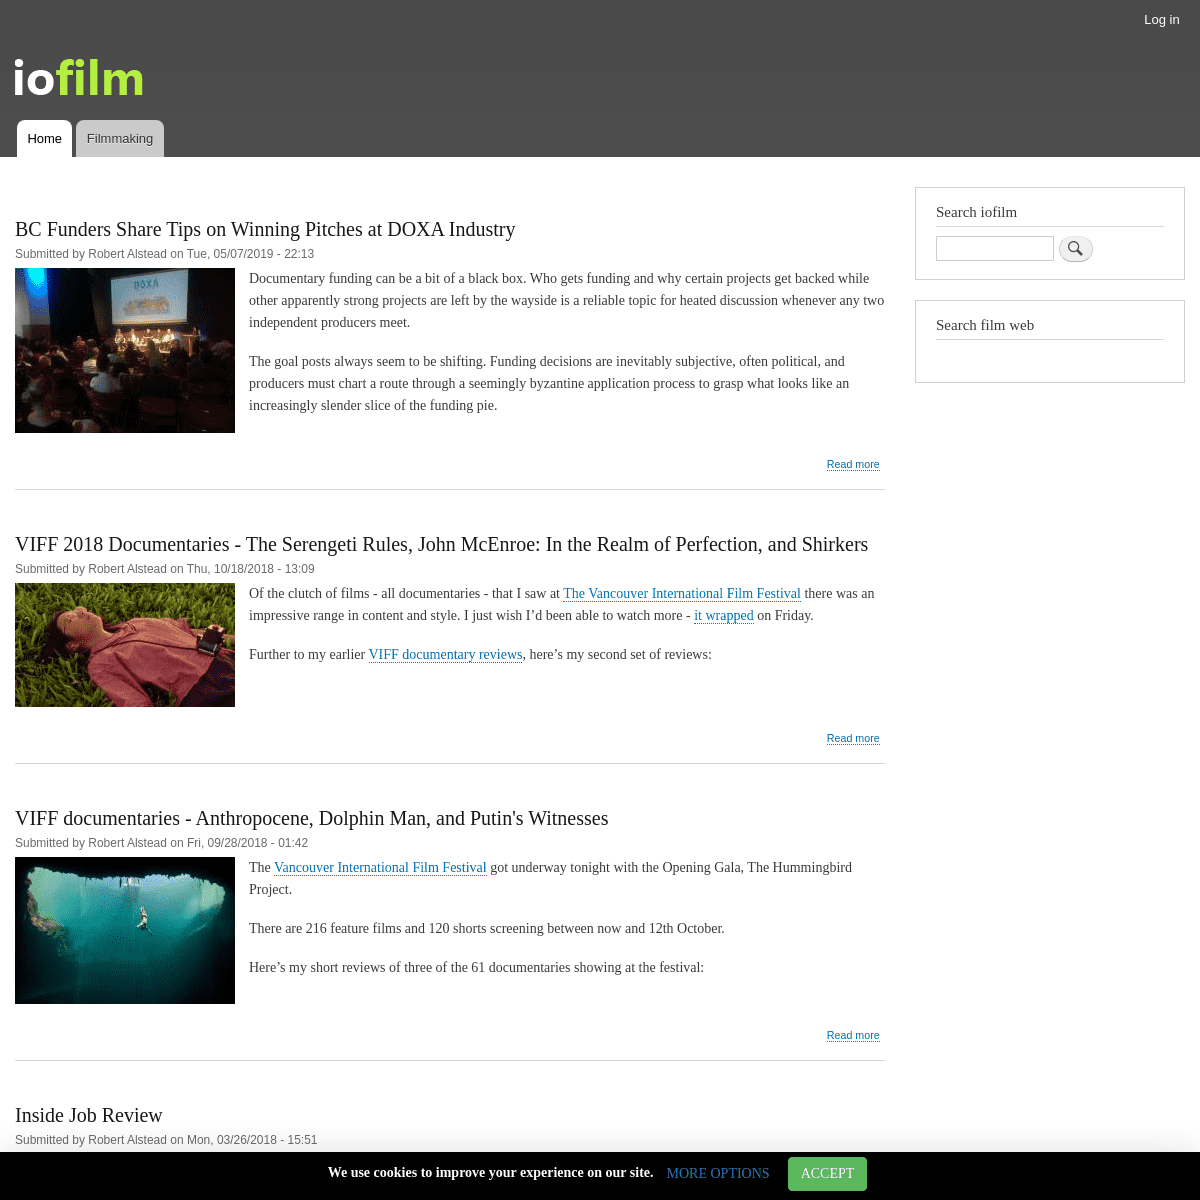 A complete backup of https://iofilm.com